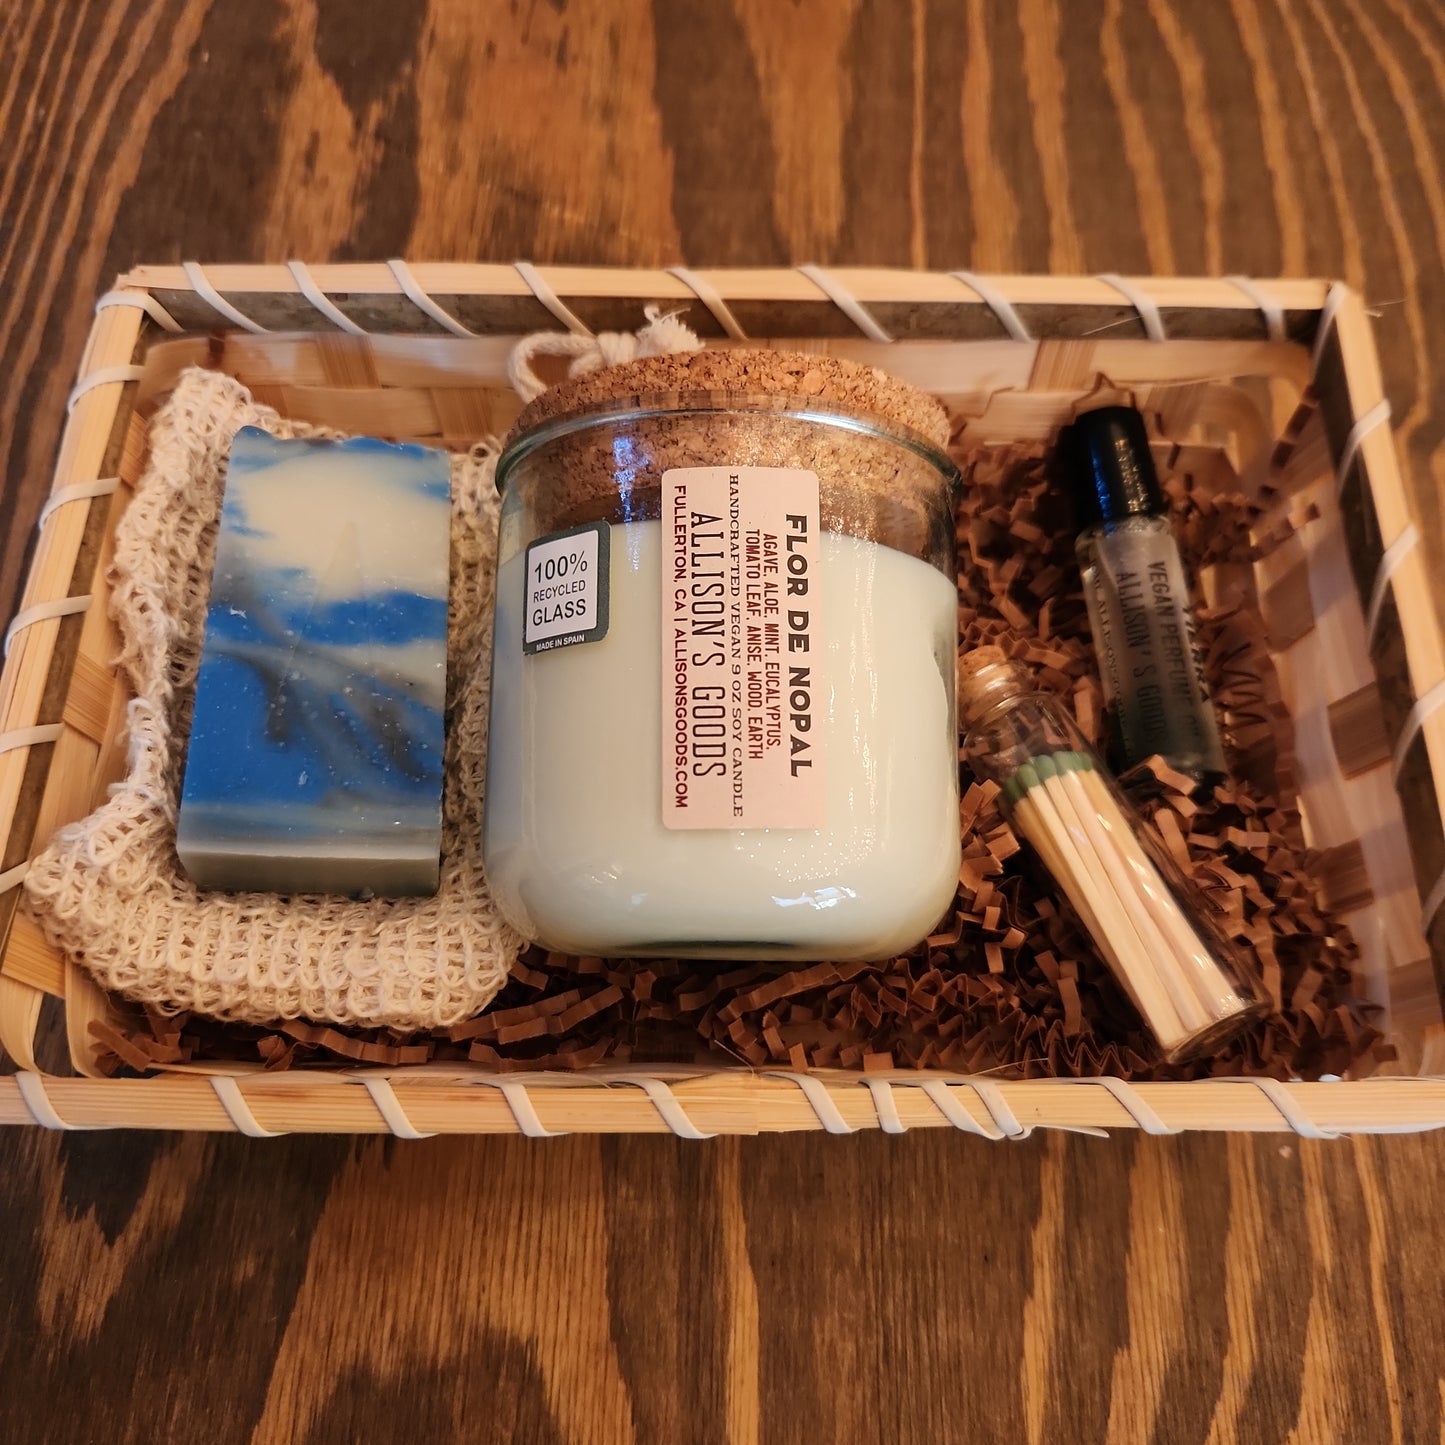 Bamboo Gift Basket with Filler